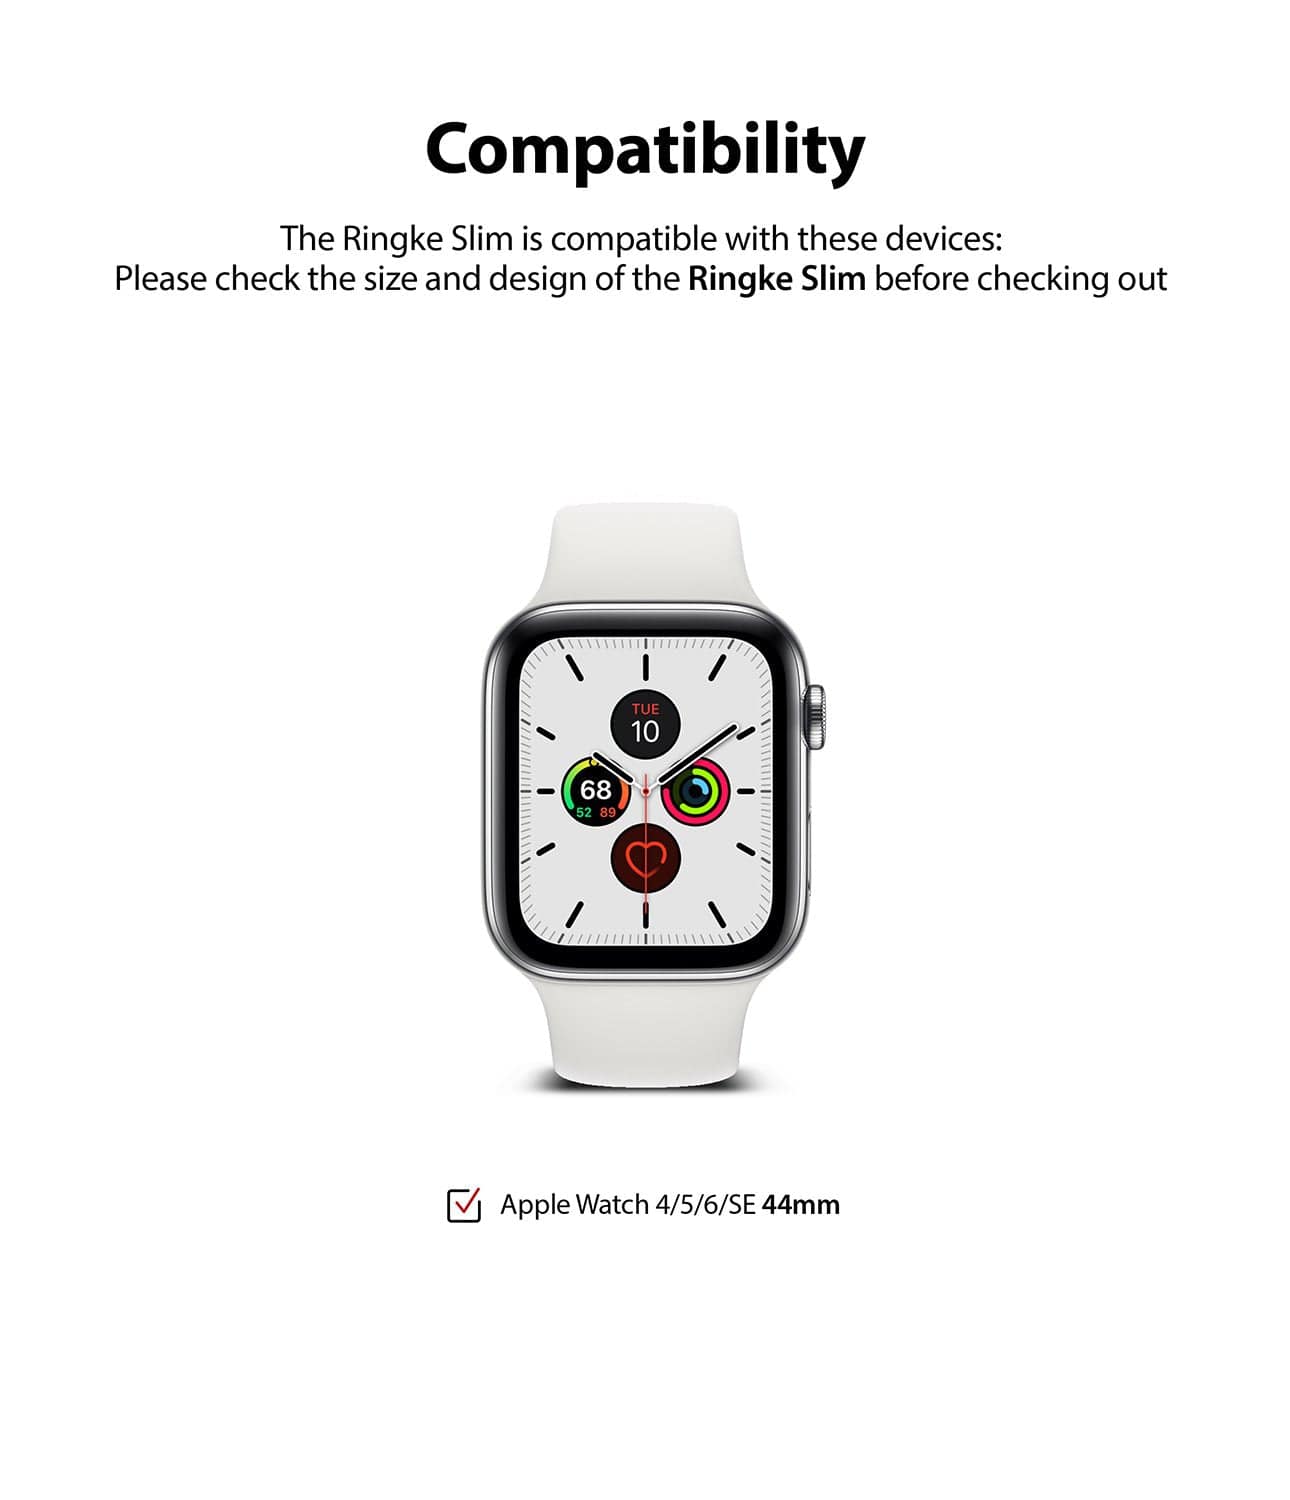 This case is compatible with the Apple Watch Series 6, SE, 5, and 4 in the 44mm size.